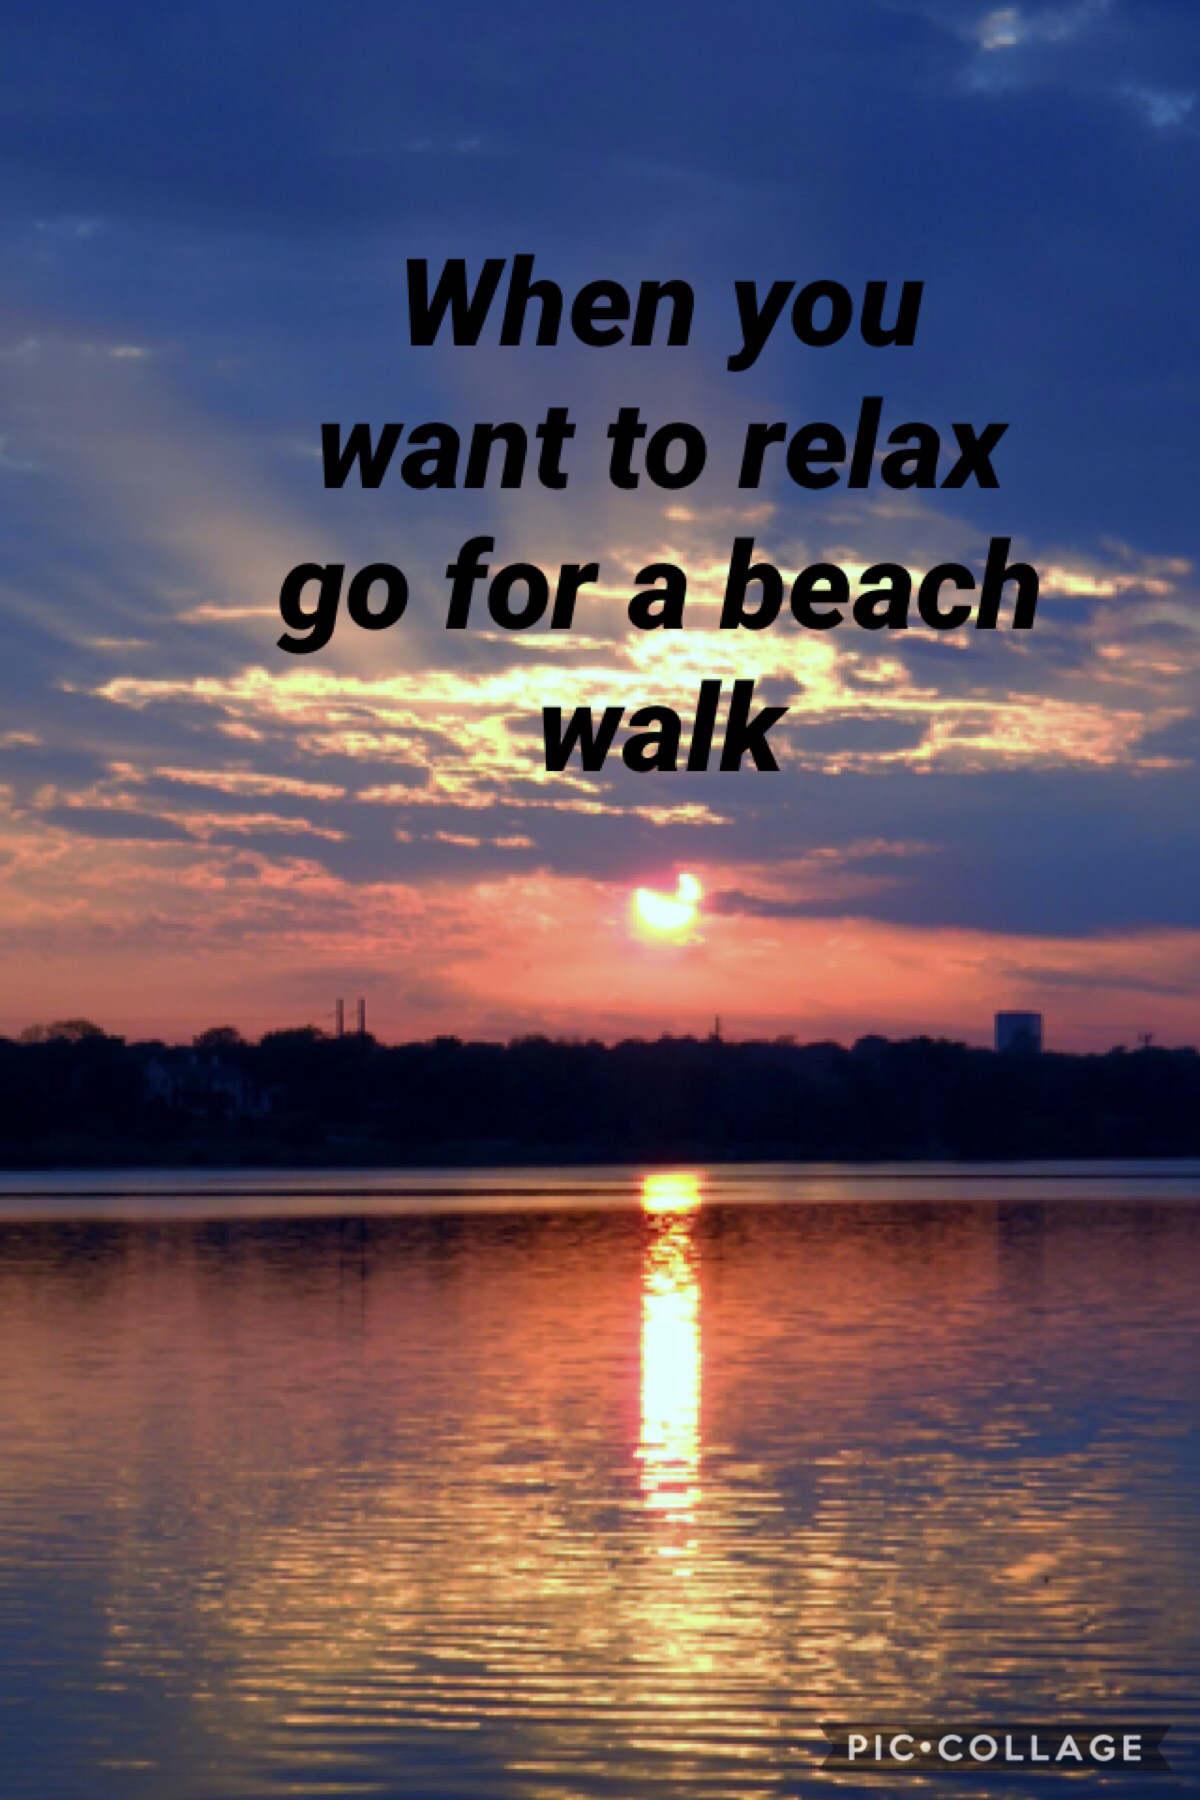 I love to beach and taking walks on them